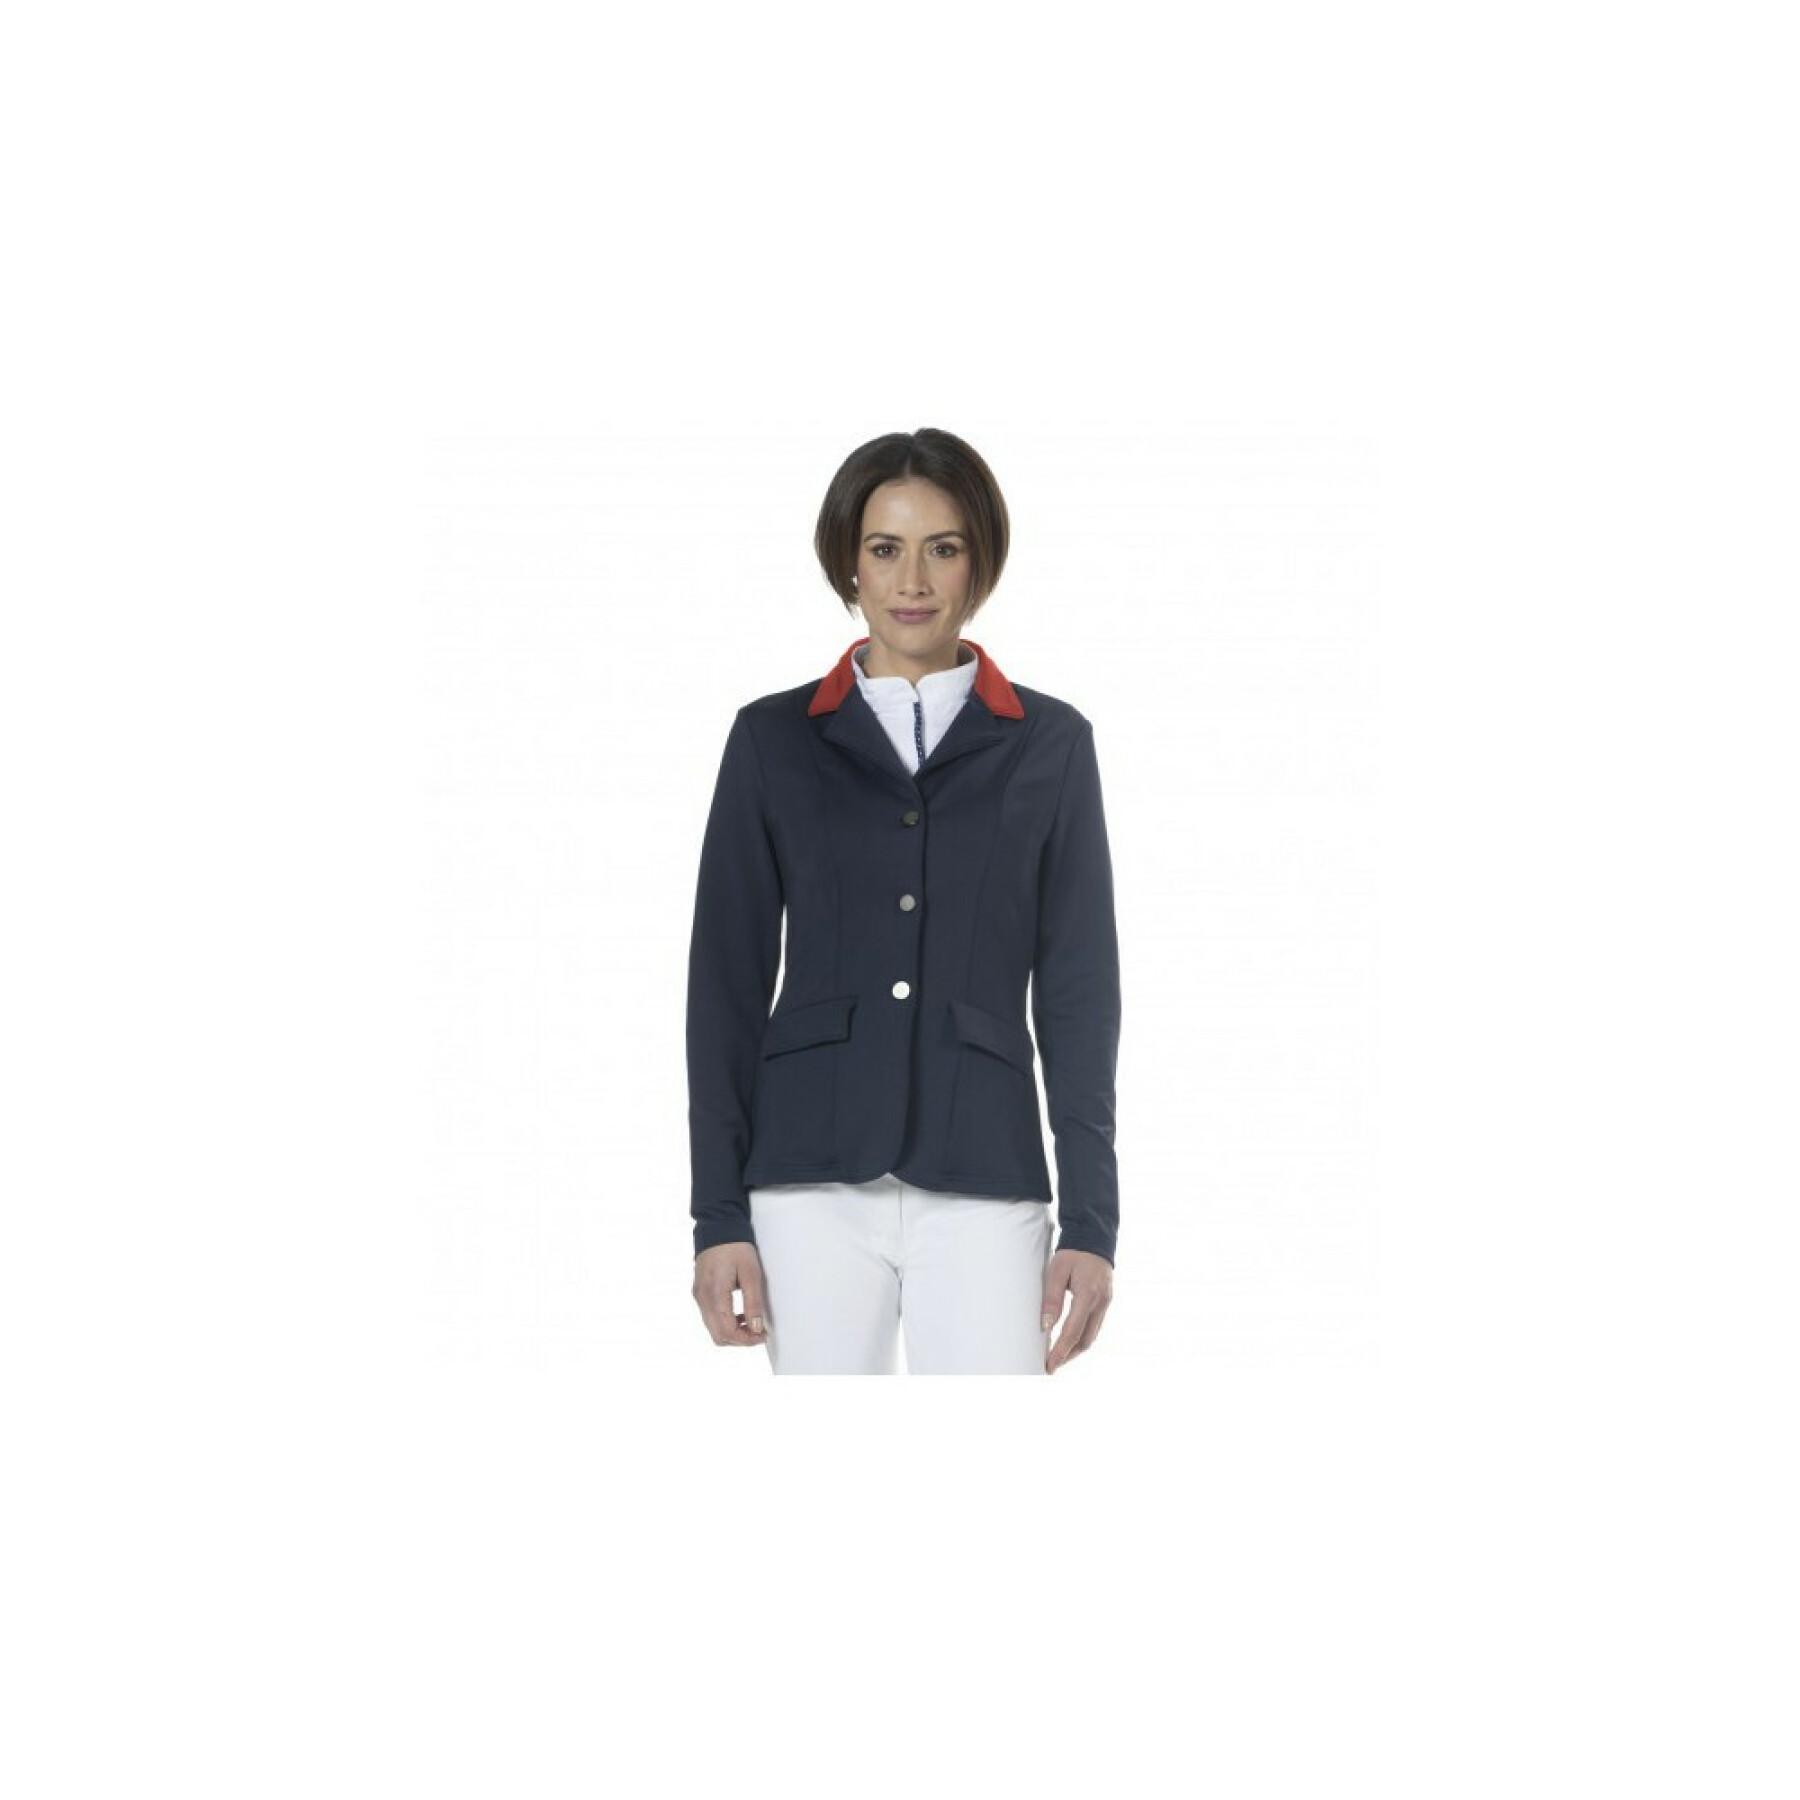 Riding jacket for girls Flags&Cup France - Limited Edition